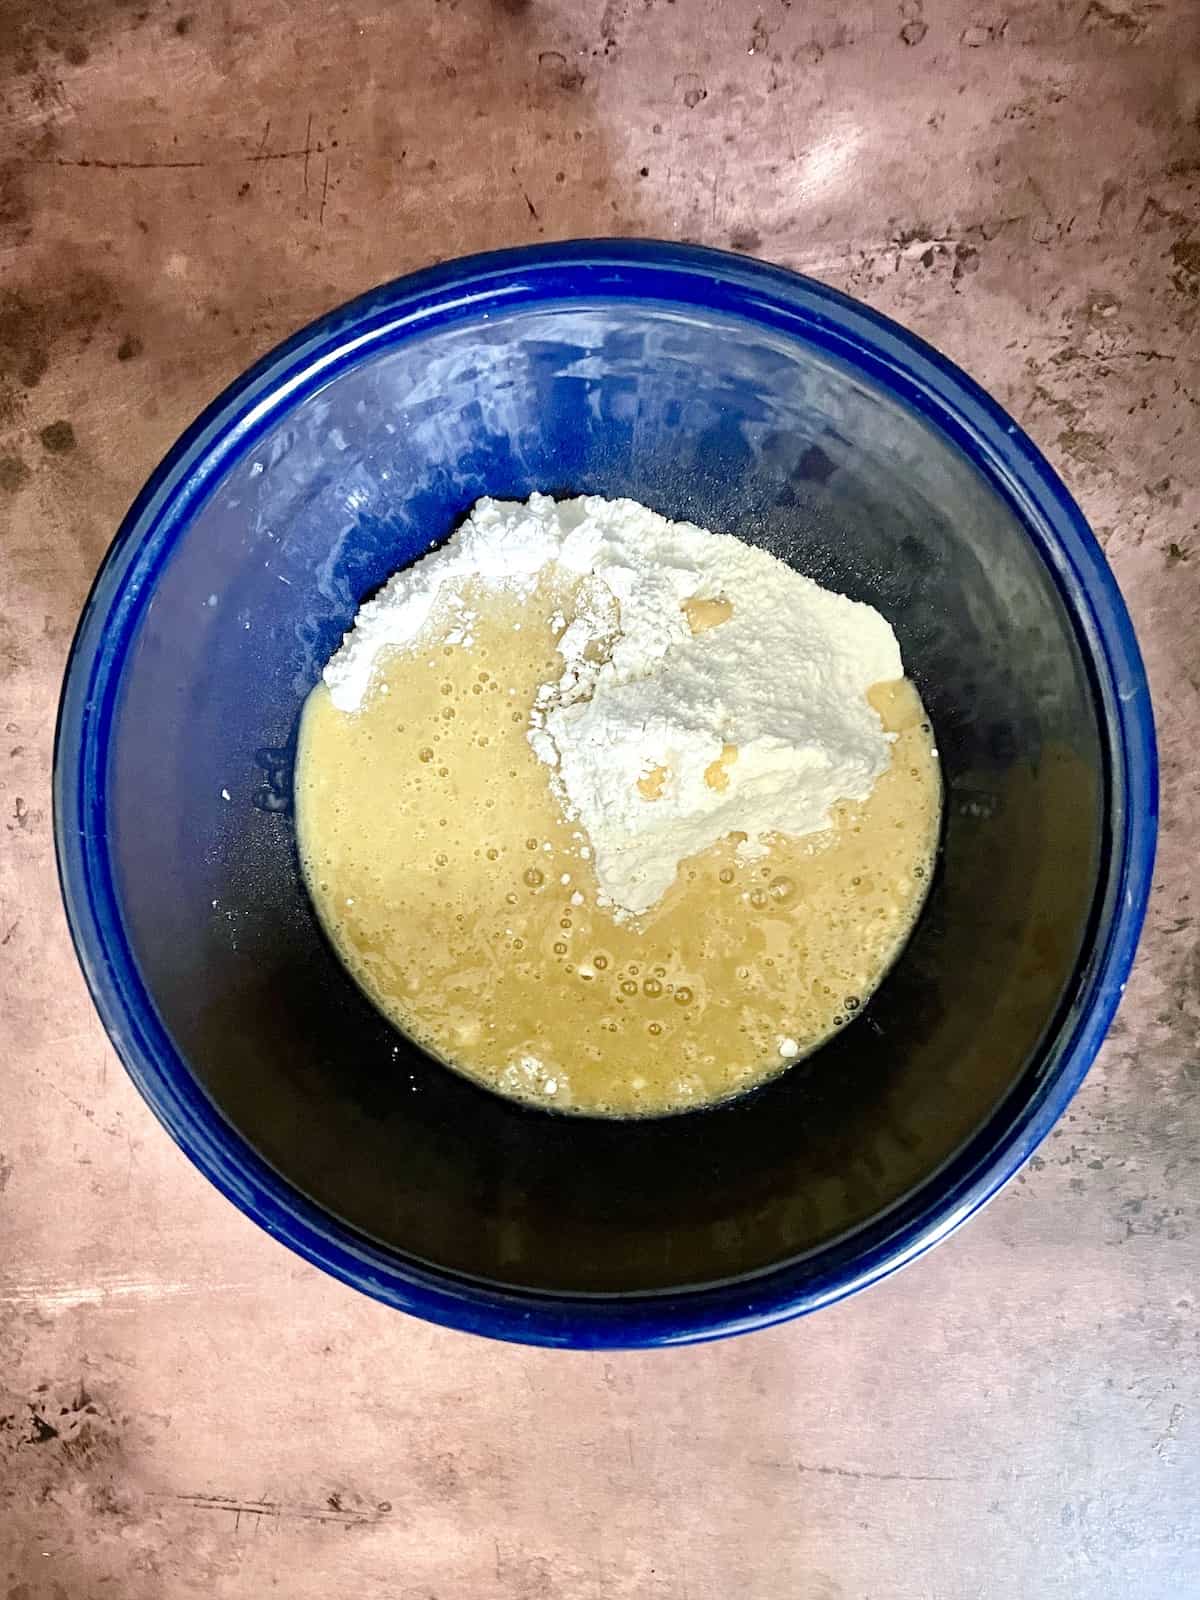 Flour with other ingredients in blue bowl.